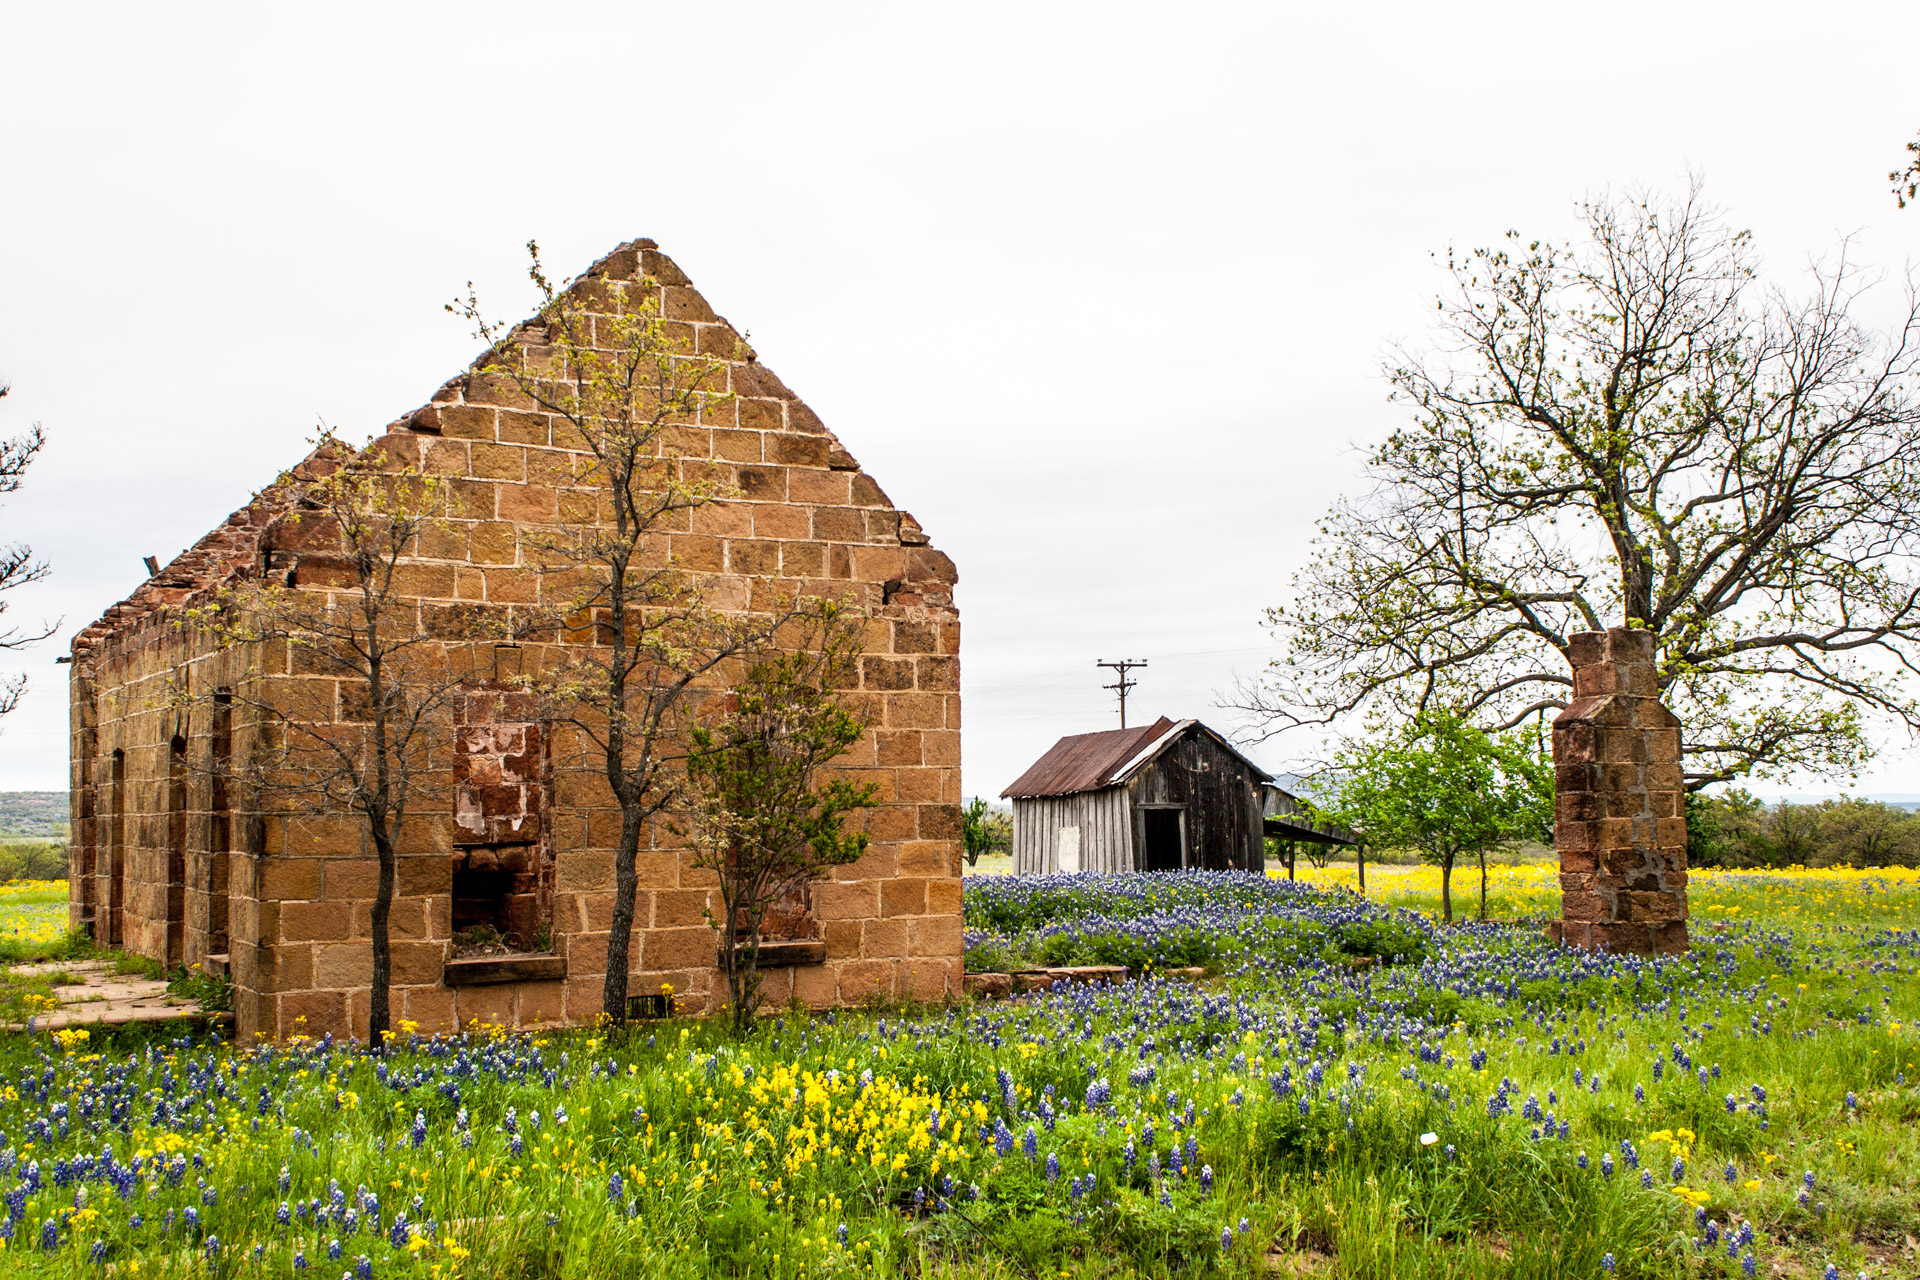 Pontotoc, Texas - A Stone Ruin With Bluebonnets (angle left)